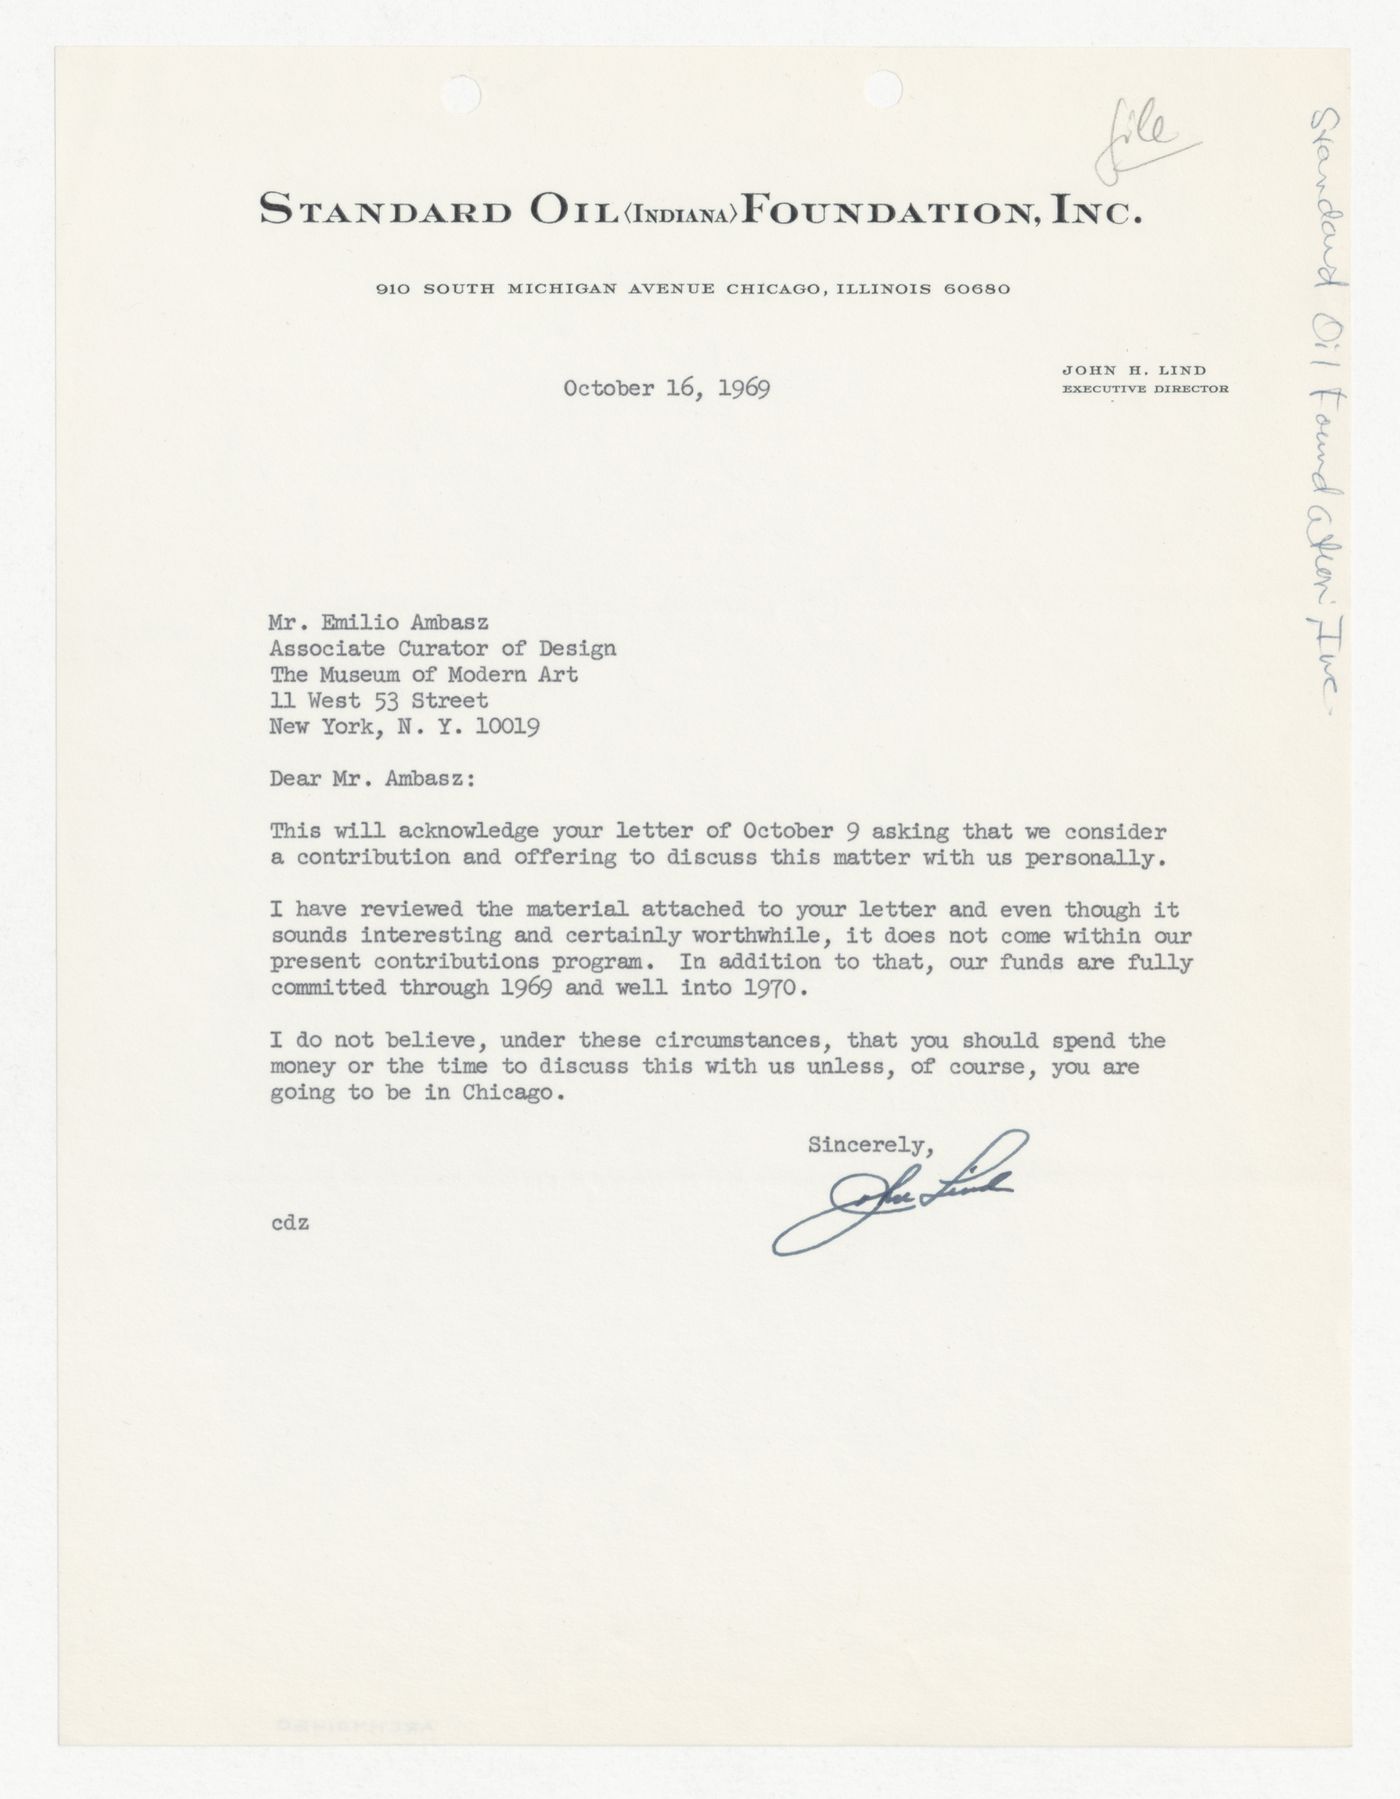 Letter from John H. Lind to Emilio Ambasz responding to proposal for Institutions for a Post-Technological Society conference